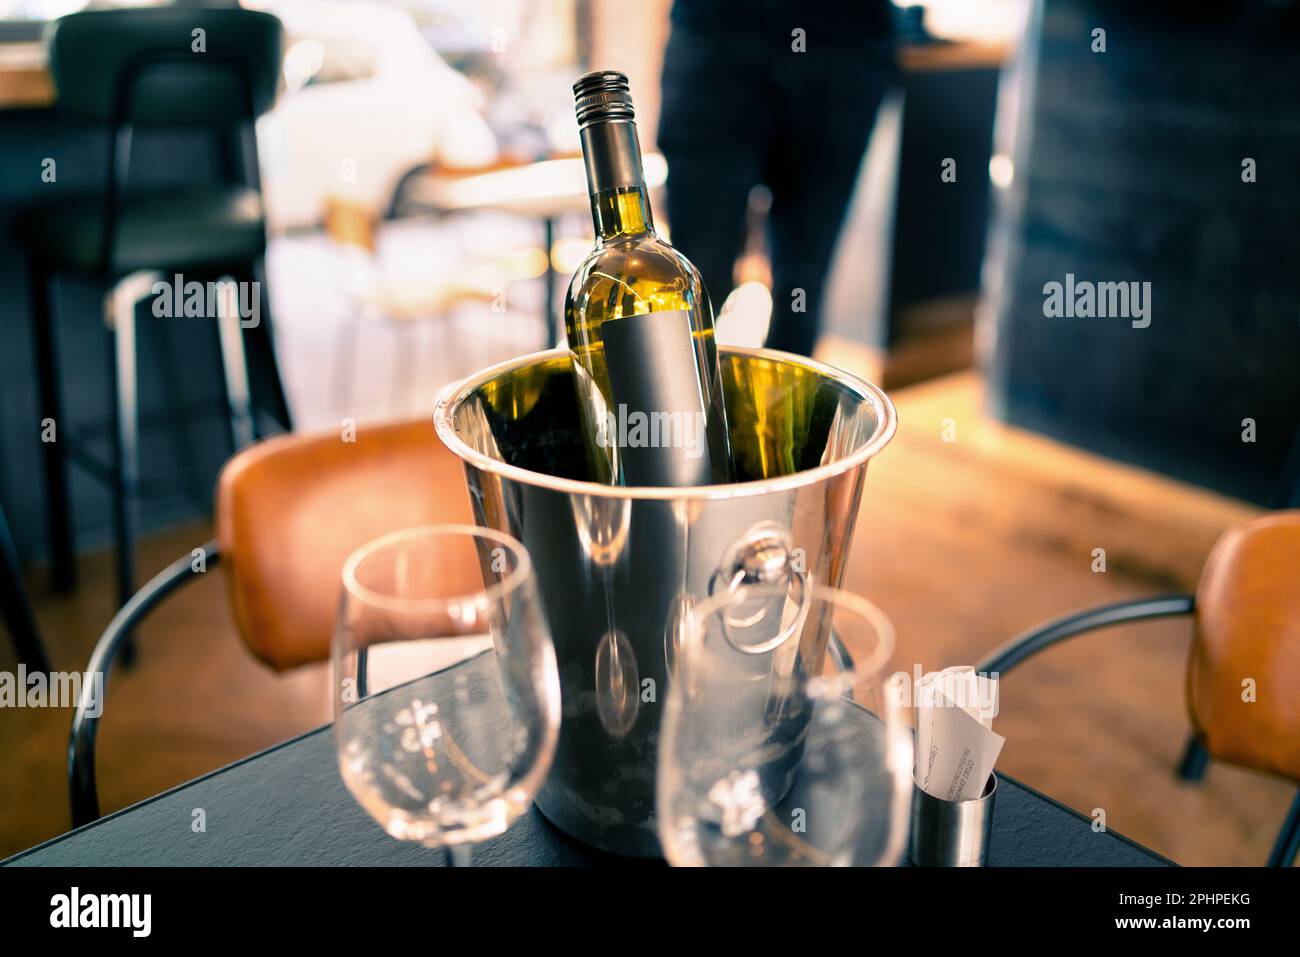 Wine bottle in ice bucket on restaurant or bar table. Drink cooler in pub. White sauvignon blanc, chardonnay or riesling. Stock Photo